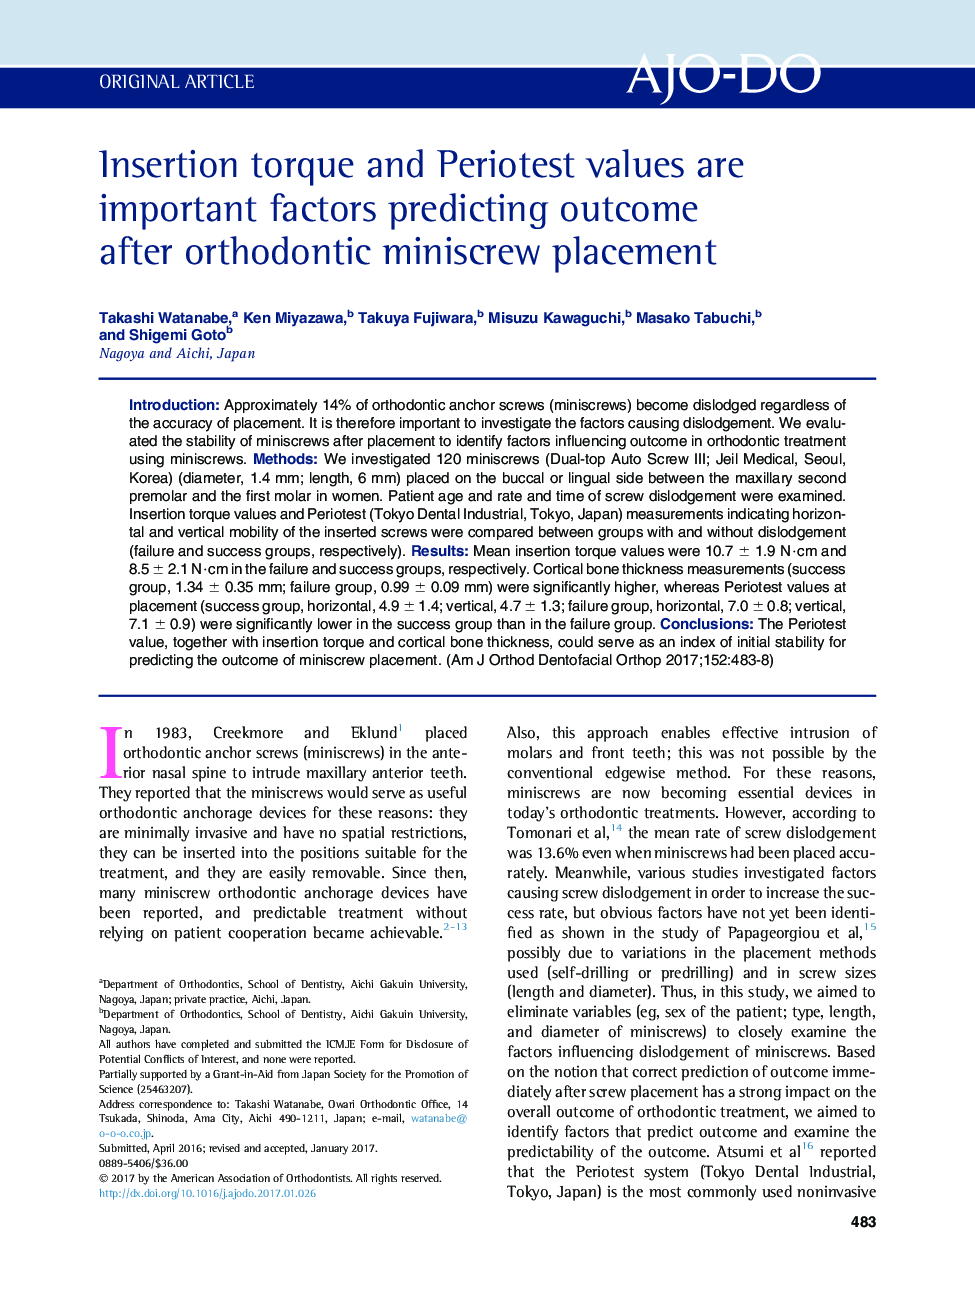 Insertion torque and Periotest values are important factors predicting outcome after orthodontic miniscrew placement